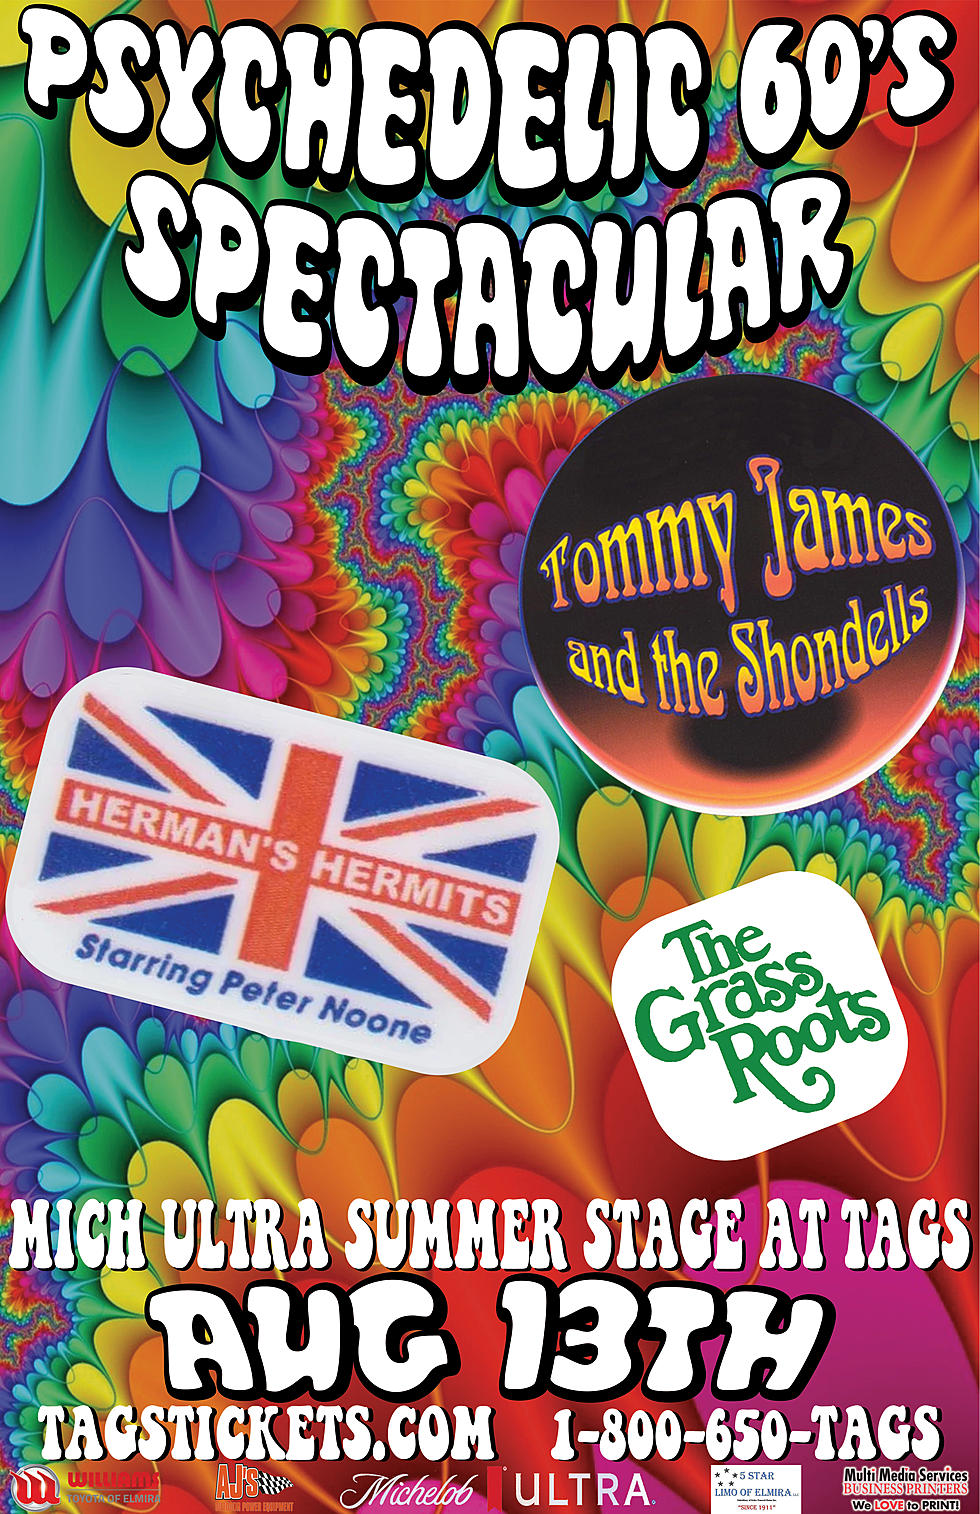 Enter For Gold Circle Tickets & Signed Guitar For Tag’s Psychedelic 60s Show